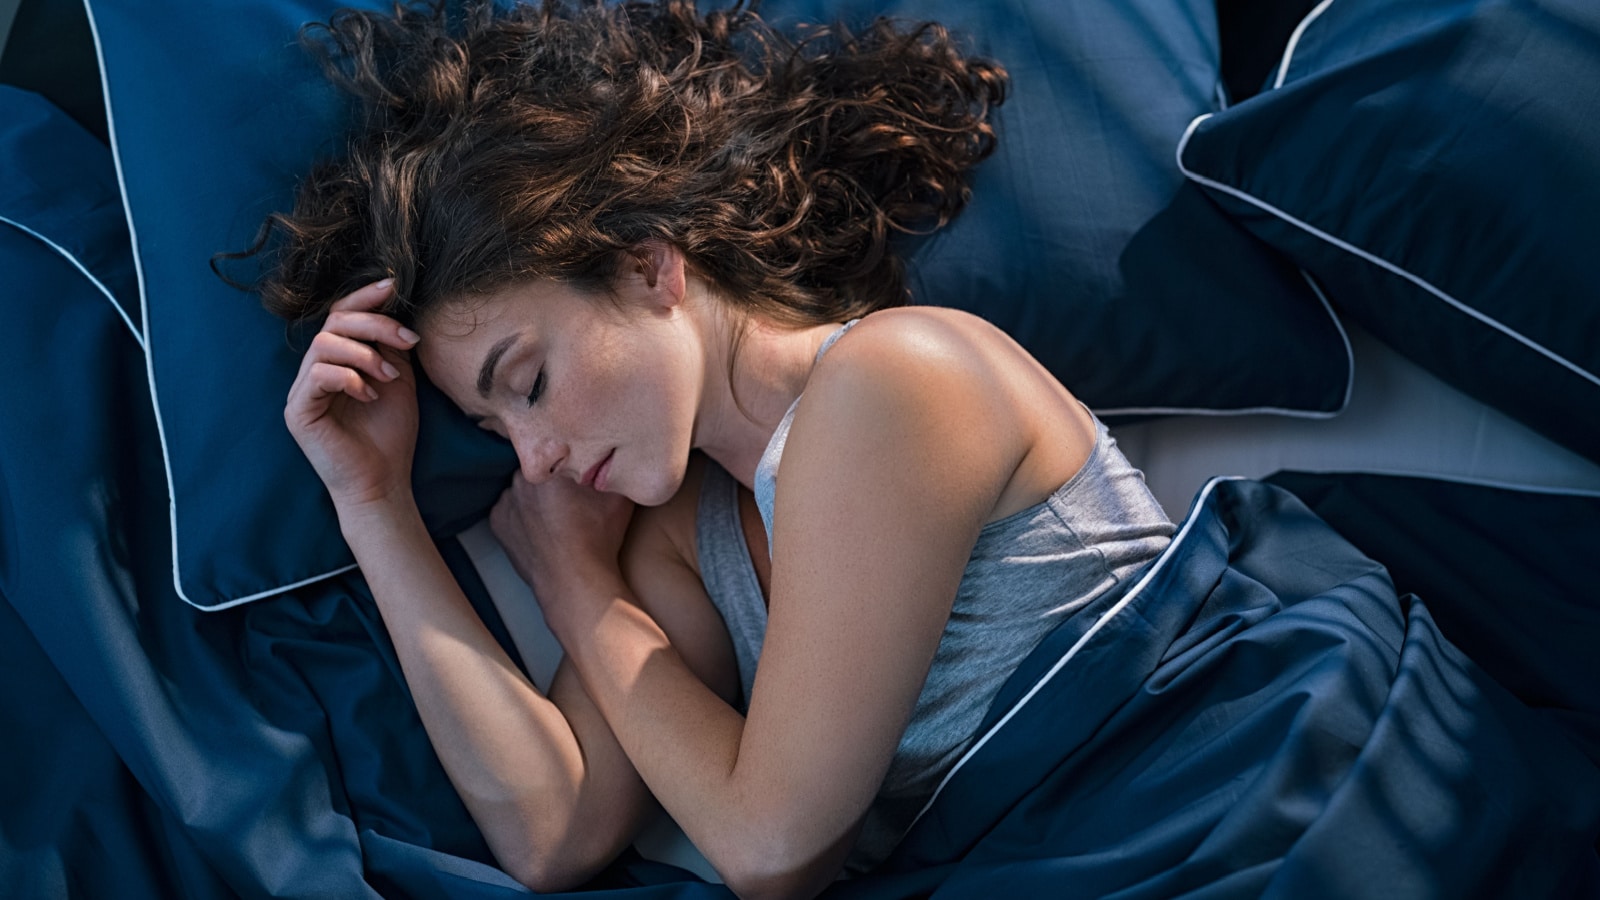 Top view of young woman sleeping on side in her bed at night. Beautiful girl sleeping profoundly and dreaming at home with blue blanket. High angle view of woman asleep with closed eyes.